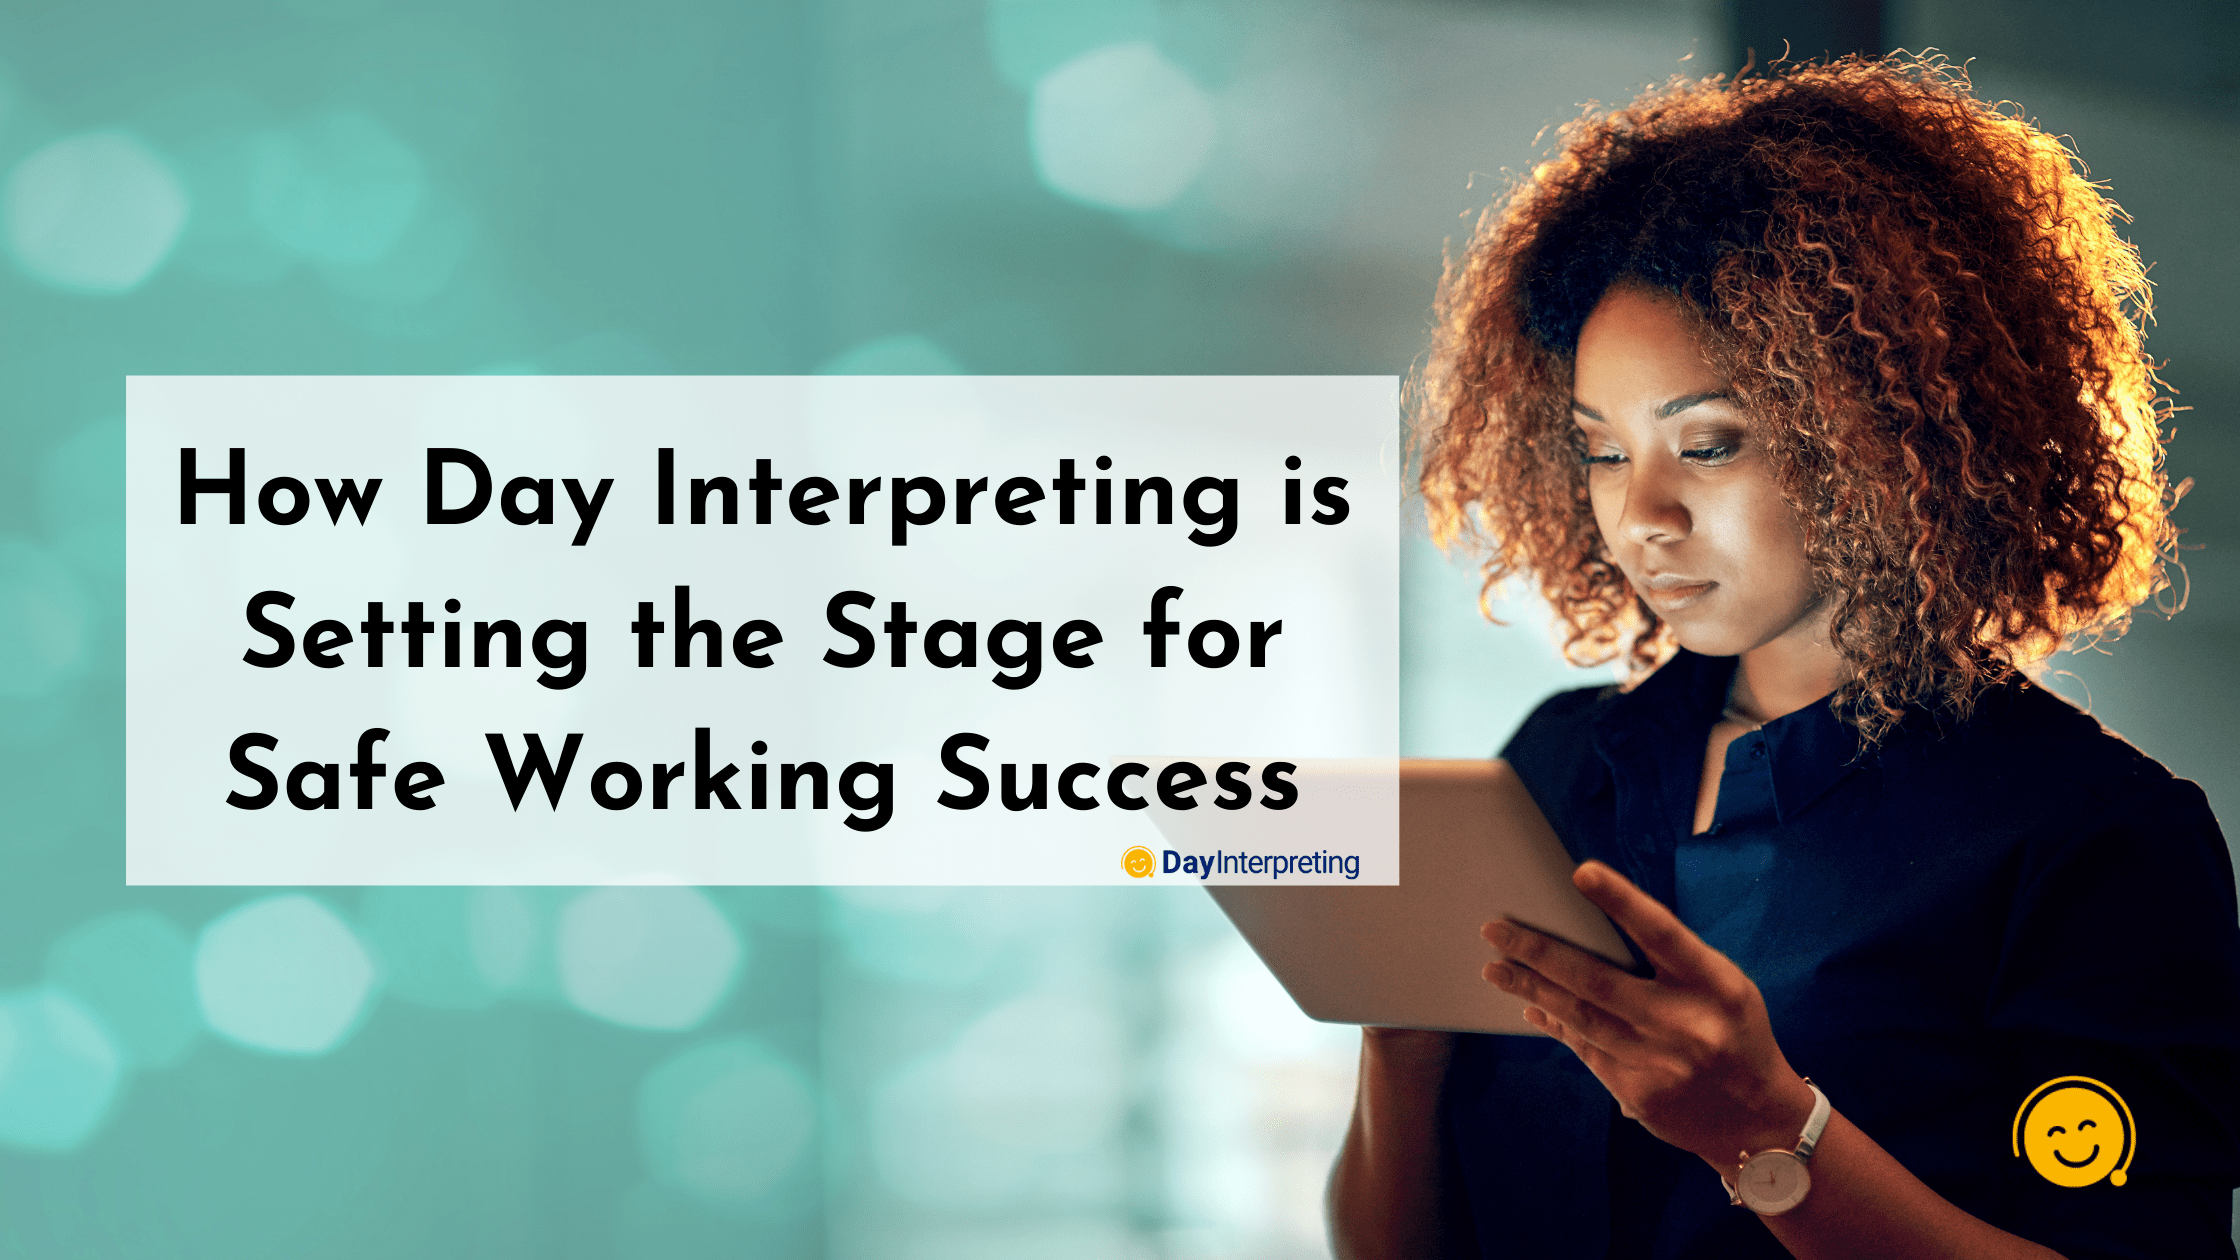 How Day Interpreting is Setting the Stage for Safe Working Success